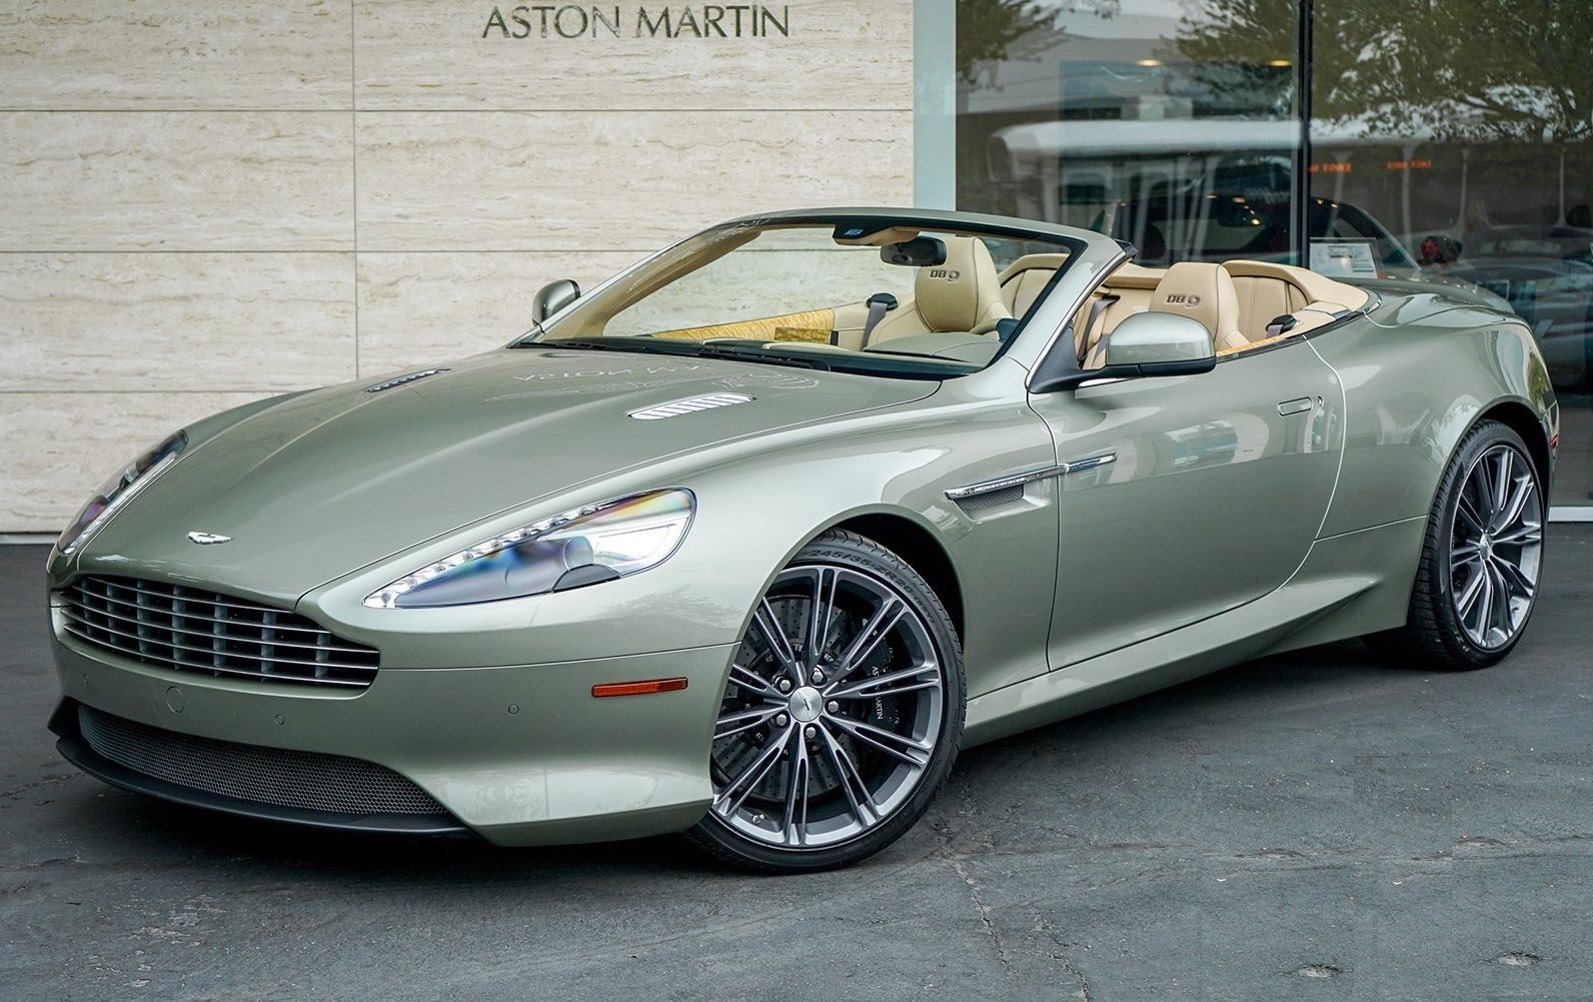 Used 2015 Aston Martin DB9 Volante for sale Sold at Aston Martin of Greenwich in Greenwich CT 06830 1